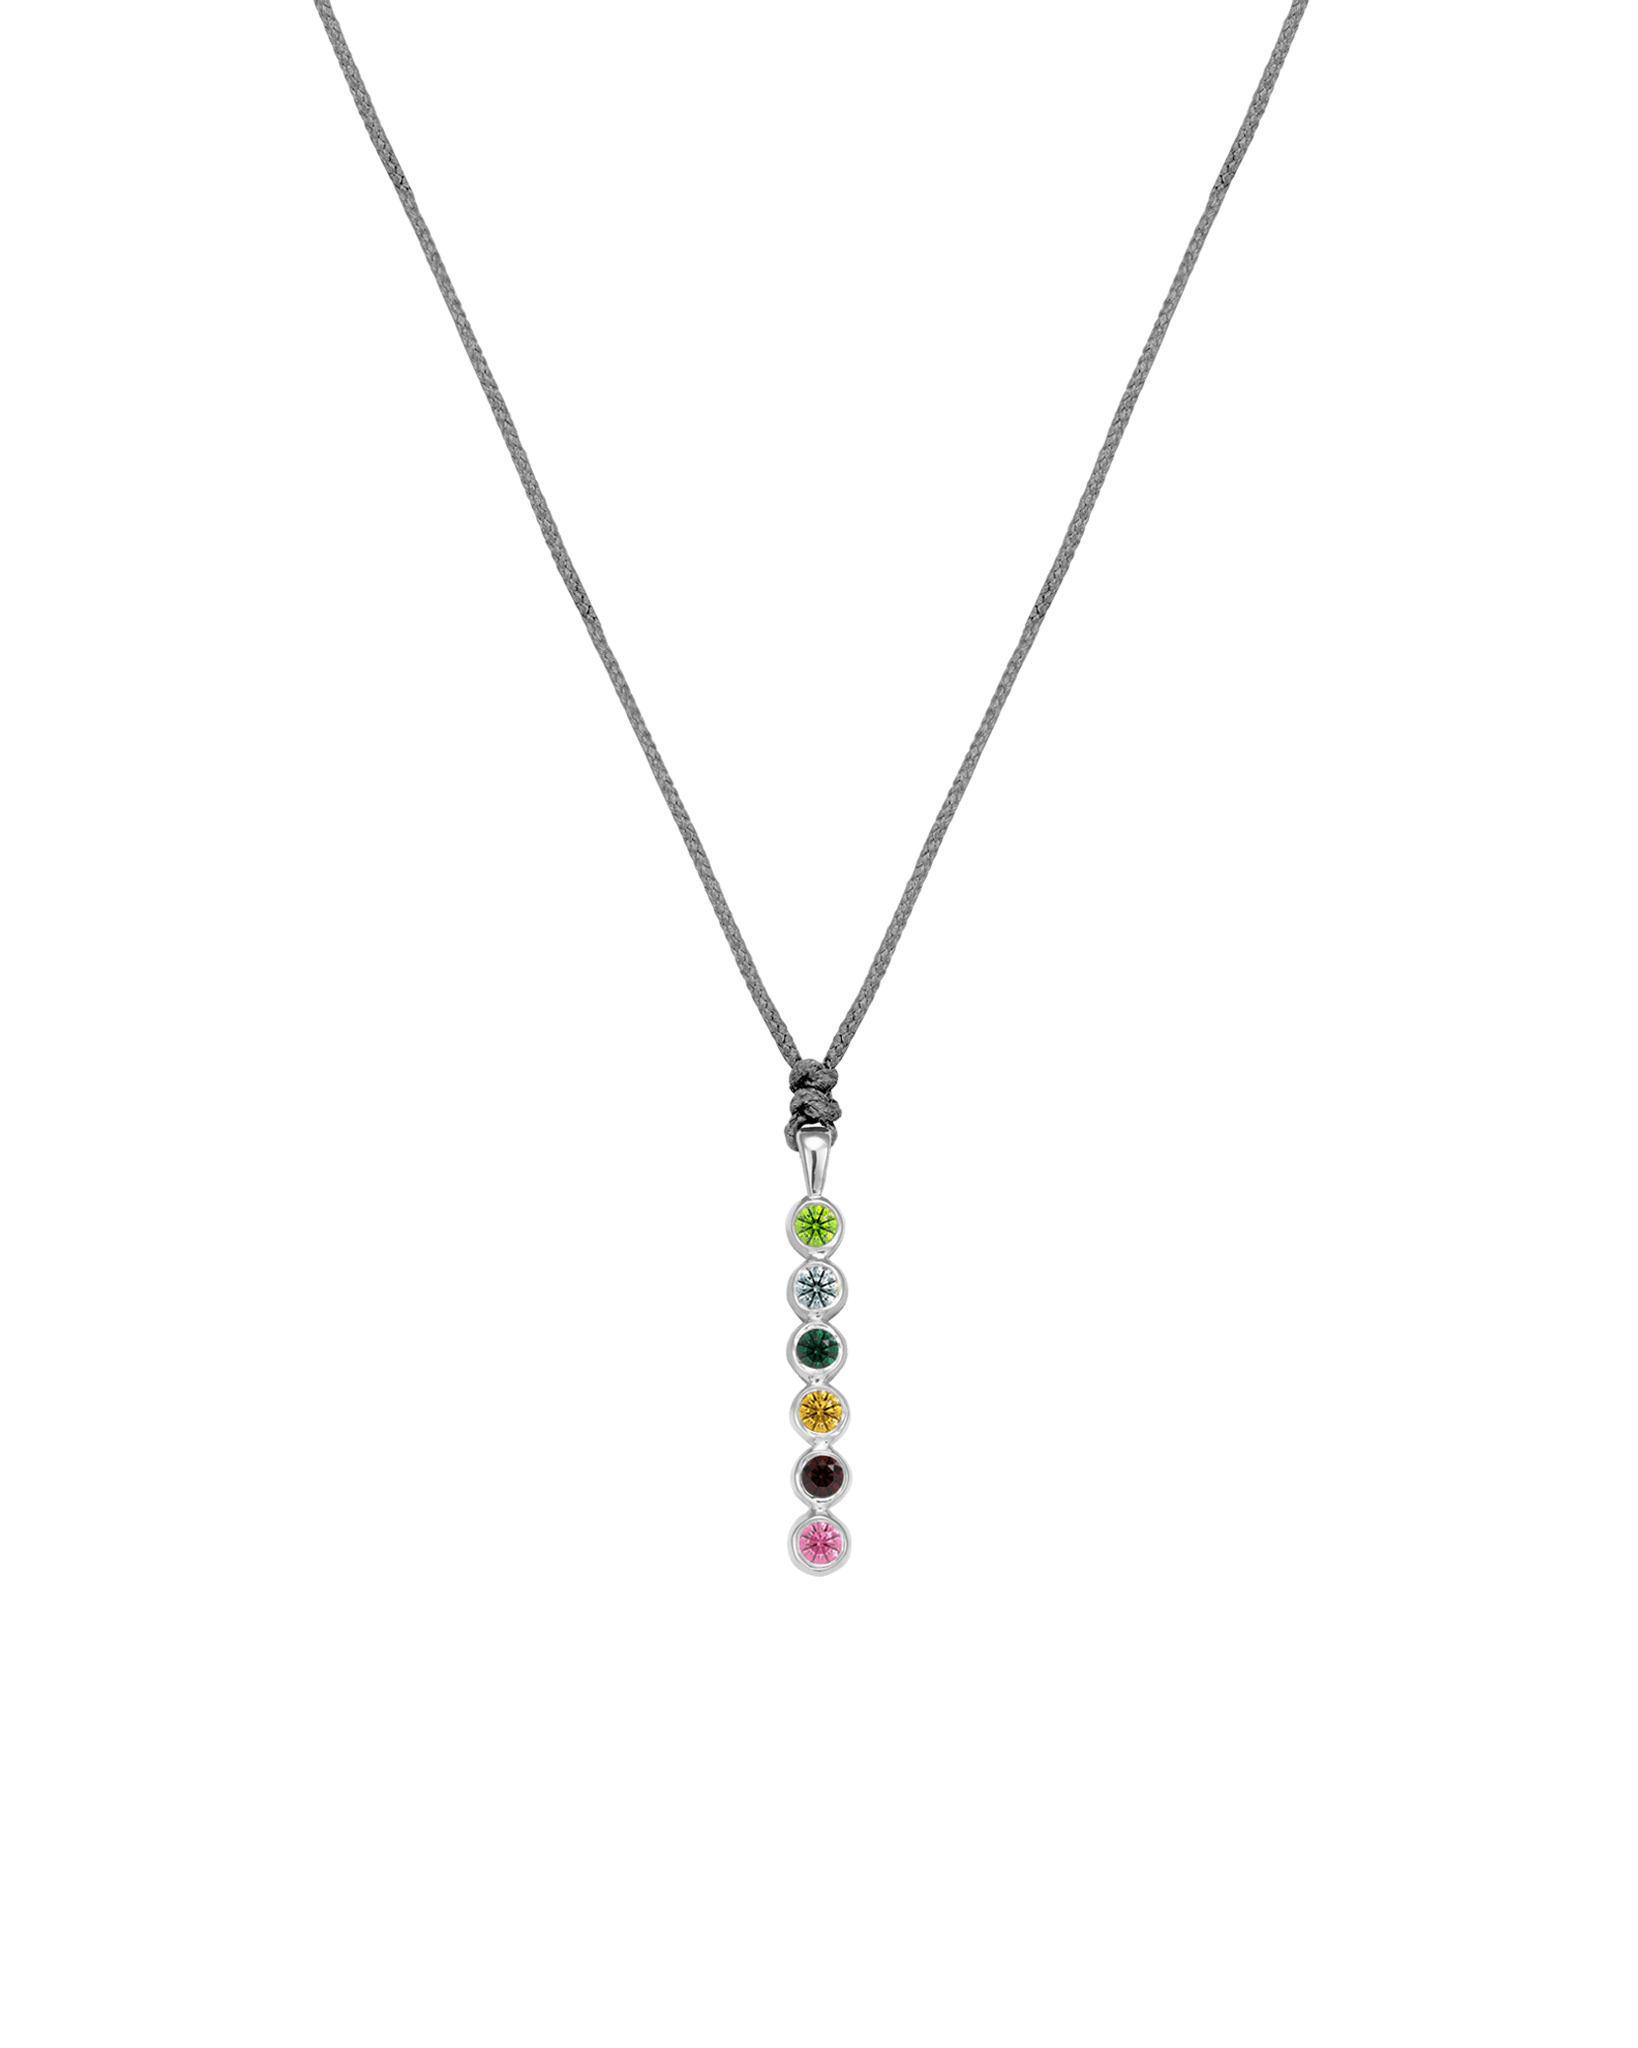 The Birthstones Bar Necklace - 14K White Gold Necklaces 14K Solid Gold Grey 2 